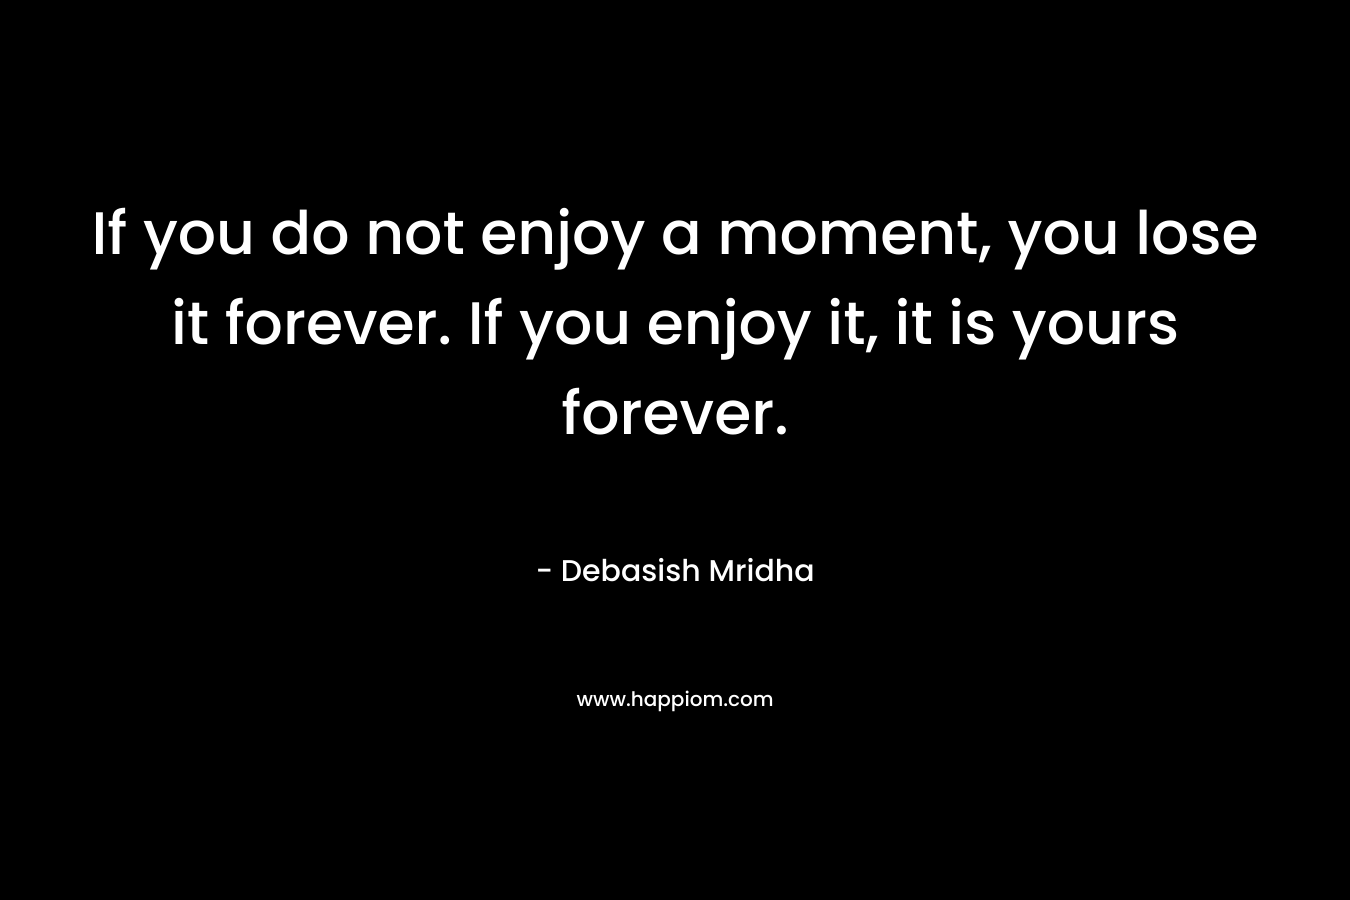 If you do not enjoy a moment, you lose it forever. If you enjoy it, it is yours forever.